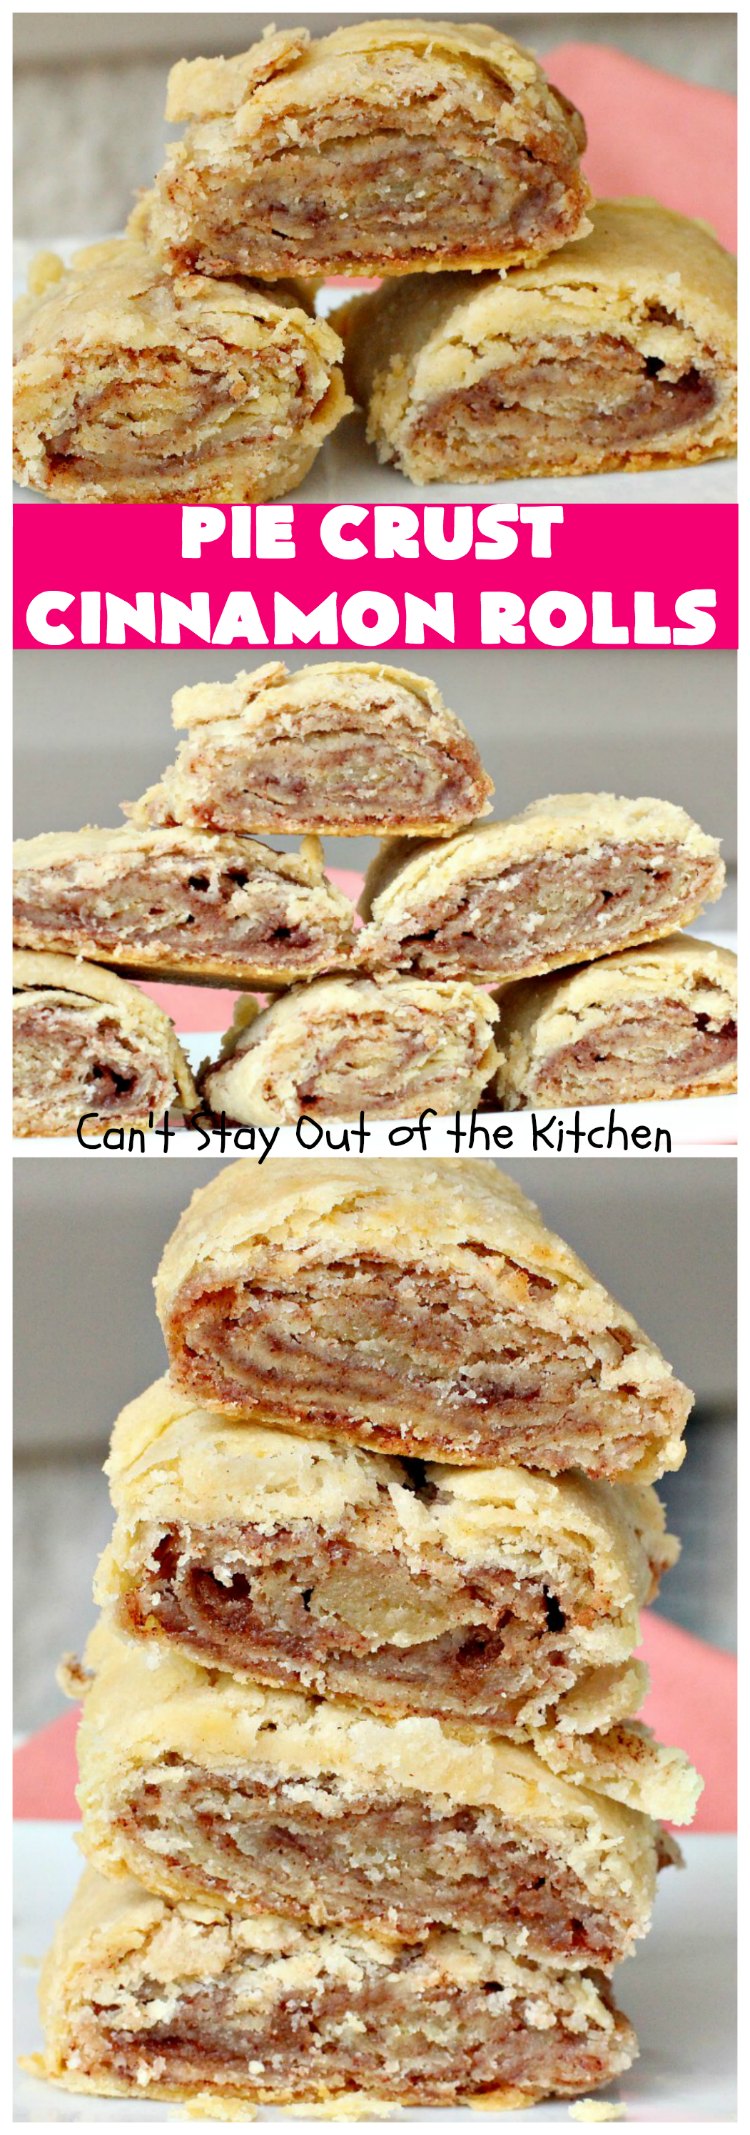 Pie Crust Cinnamon Rolls | Can't Stay Out of the KitchenPie Crust Cinnamon Rolls | Can't Stay Out of the Kitchen